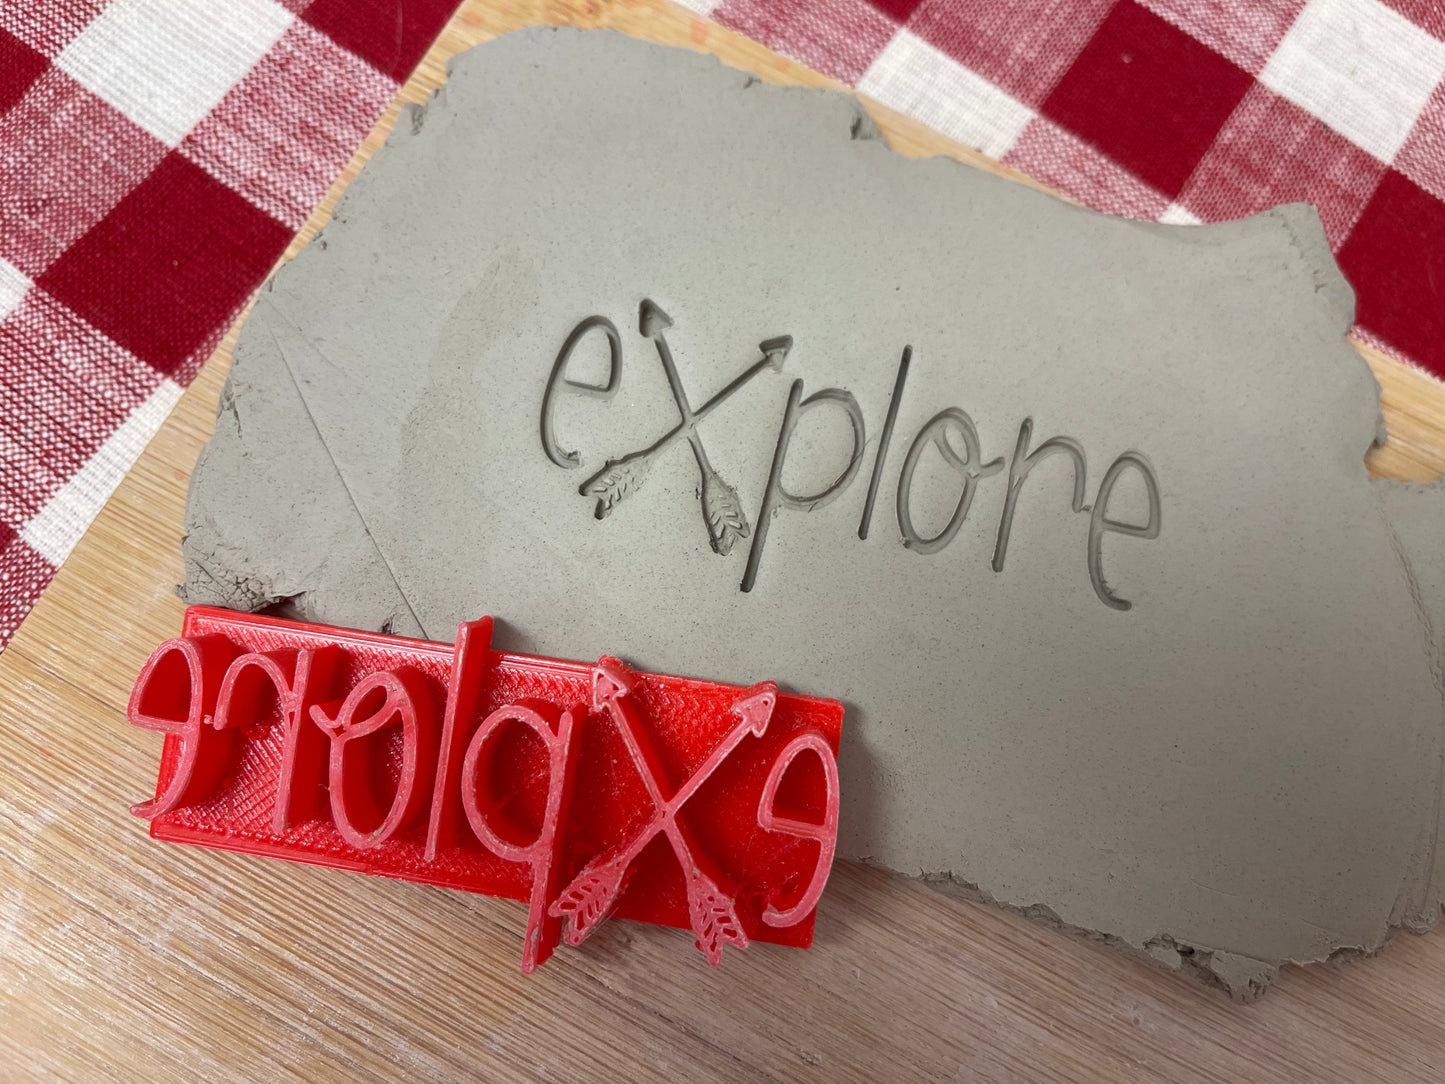 "Explore" word stamp - March 2023 mystery box, plastic 3D printed, multiple sizes available